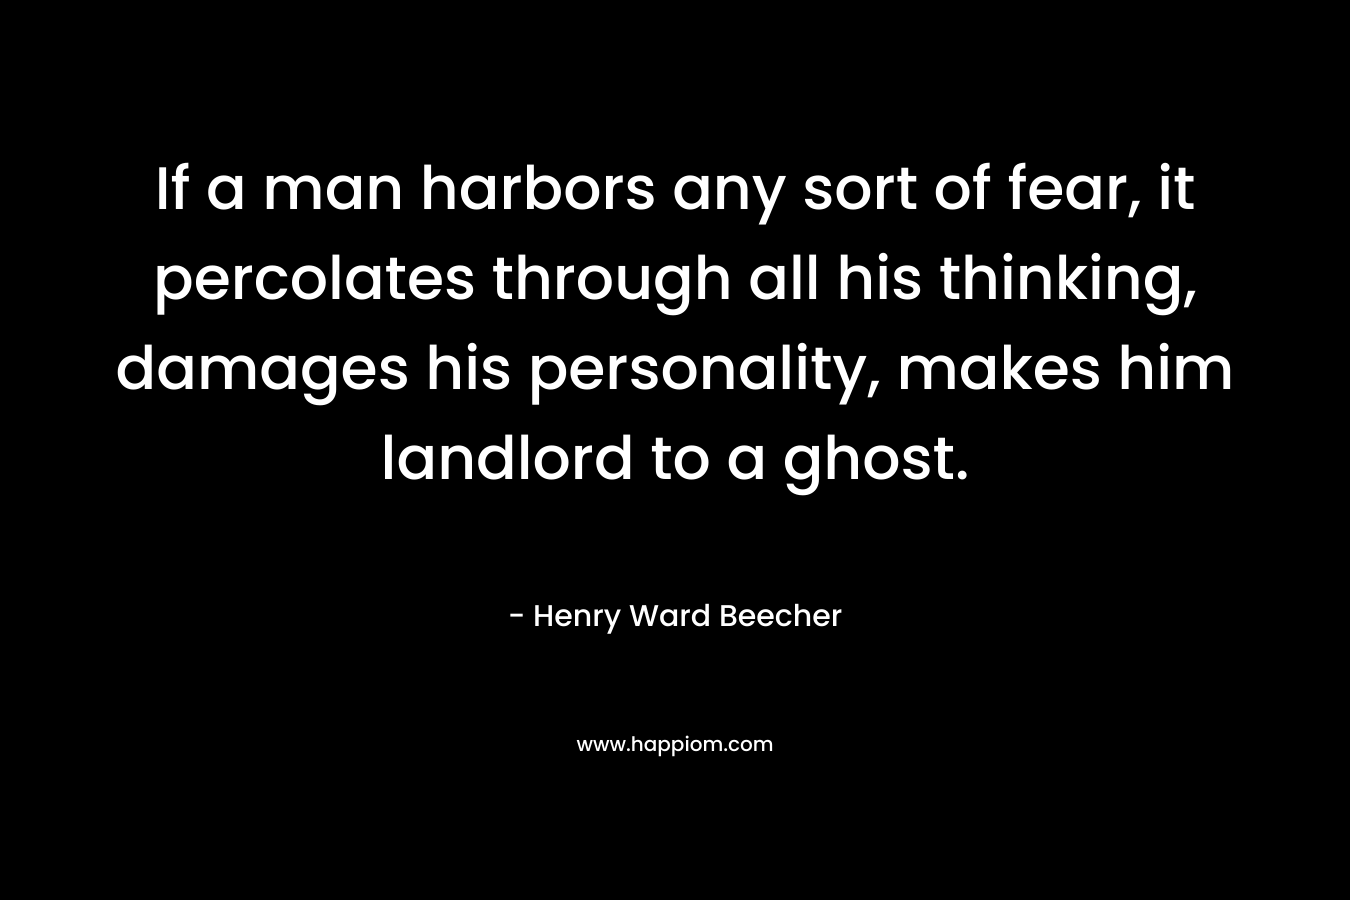 If a man harbors any sort of fear, it percolates through all his thinking, damages his personality, makes him landlord to a ghost. – Henry Ward Beecher